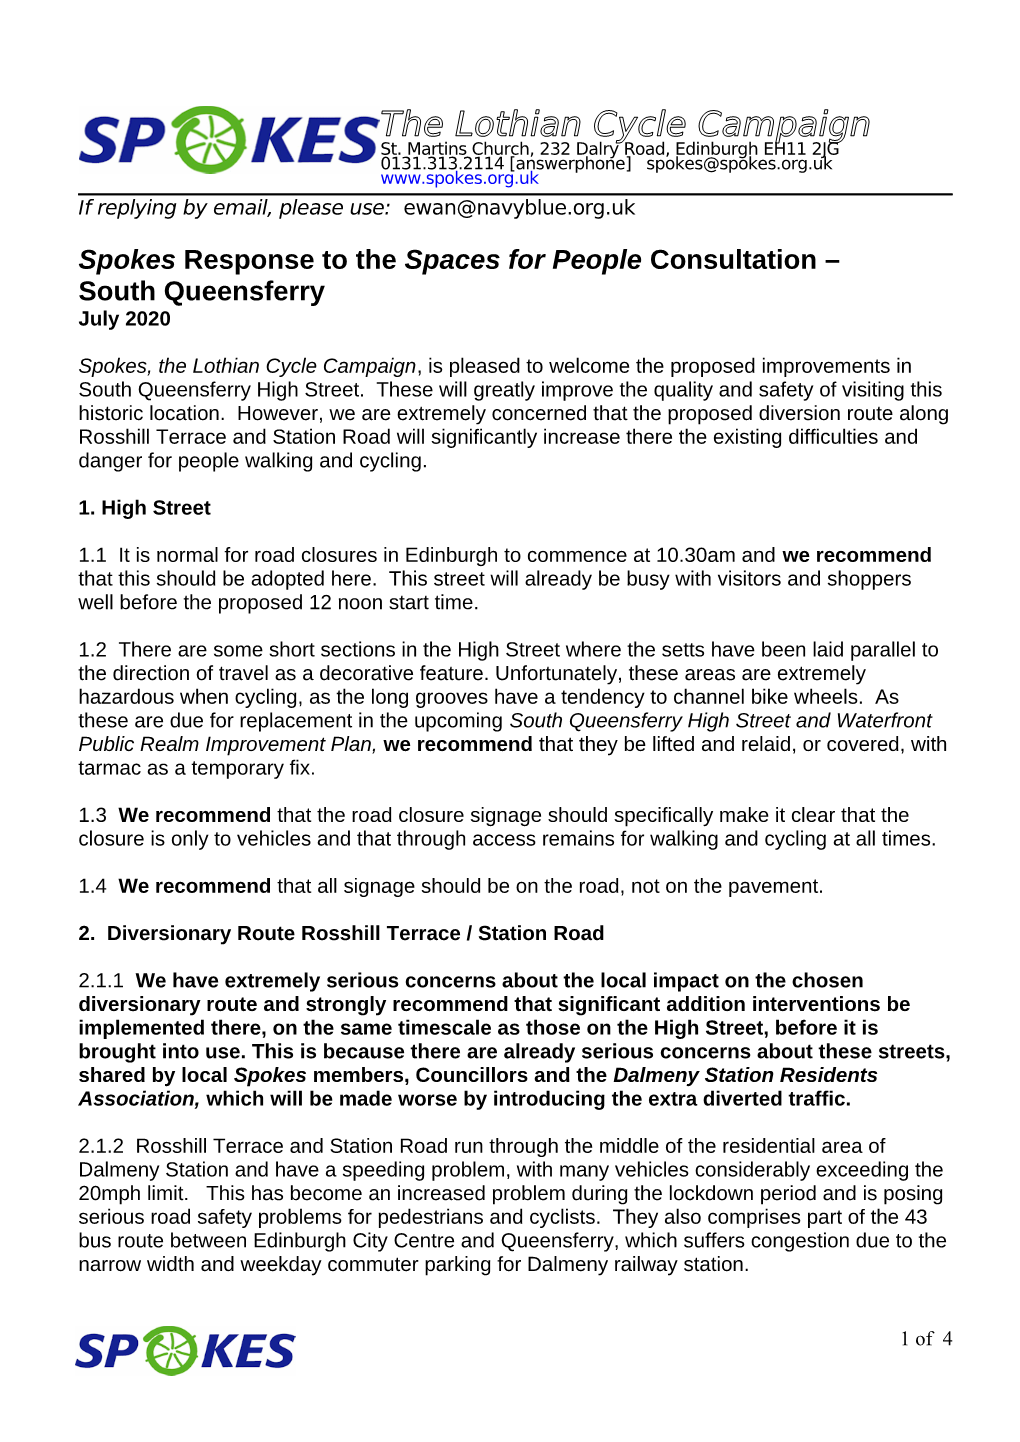 Spokes Response to the Spaces for People Consultation – South Queensferry July 2020